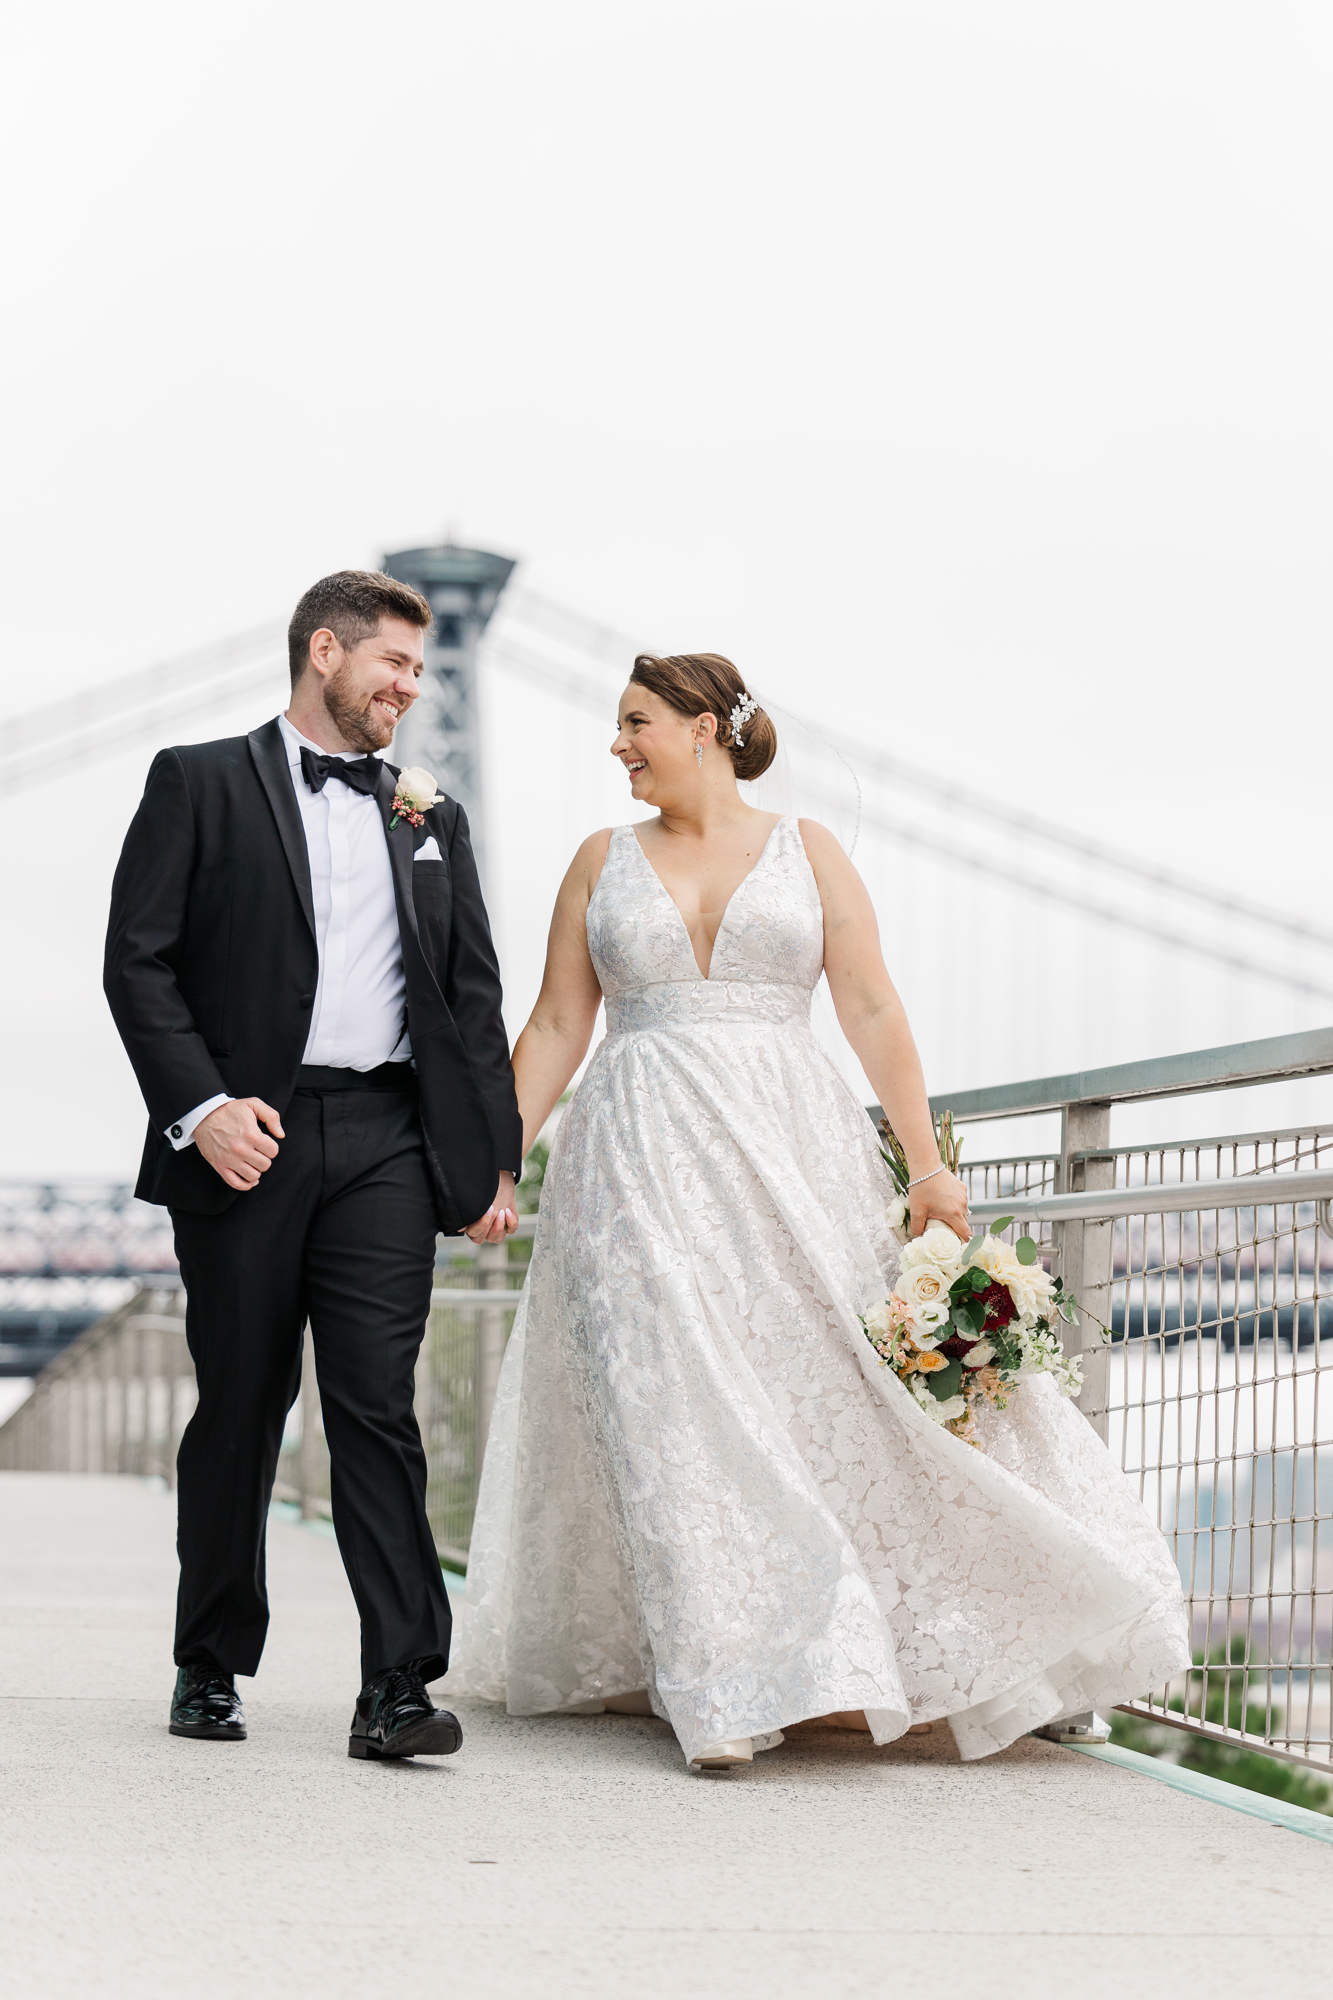 The Cost of New York Photographers for a Beautiful Elopement